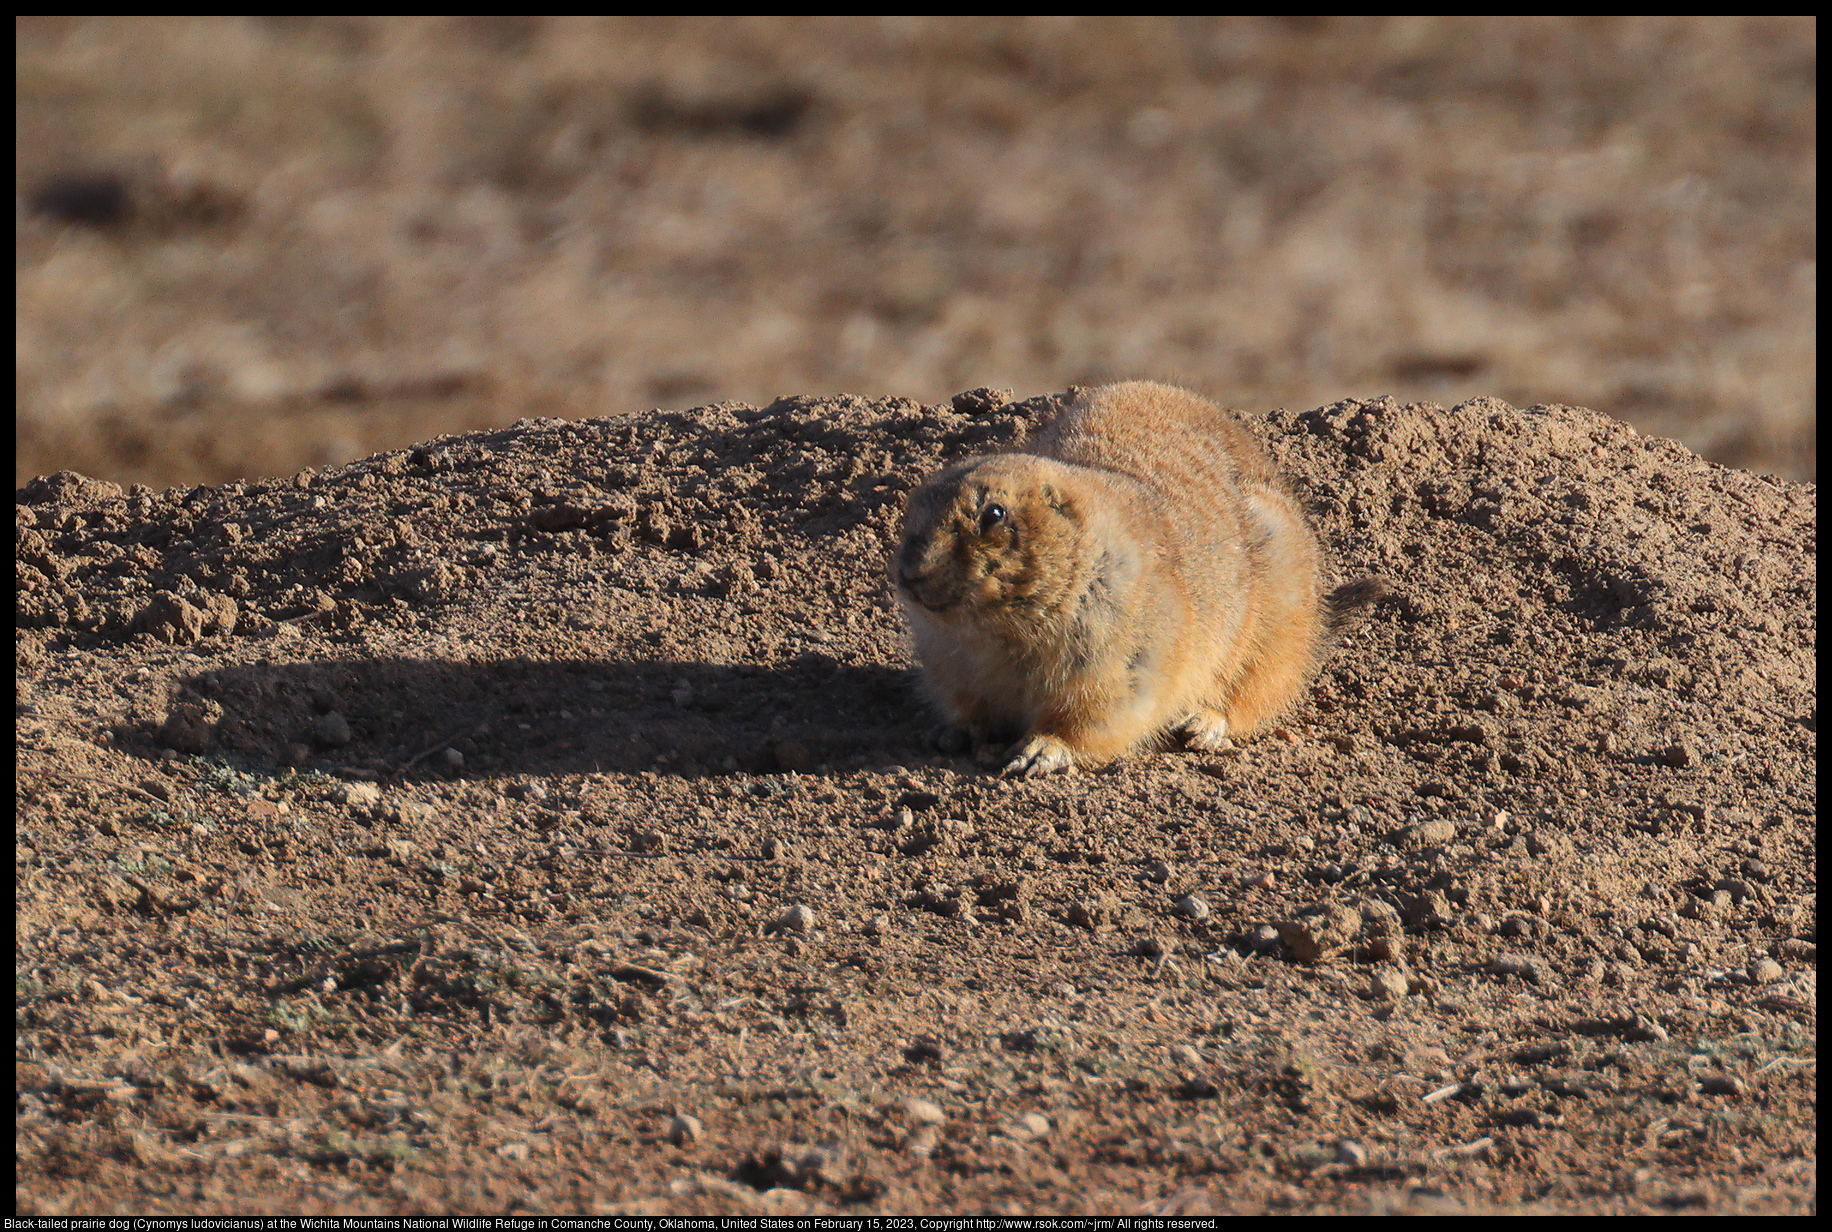 Black-tailed prairie dog (Cynomys ludovicianus) at the Wichita Mountains National Wildlife Refuge in Comanche County, Oklahoma, United States on February 15, 2023